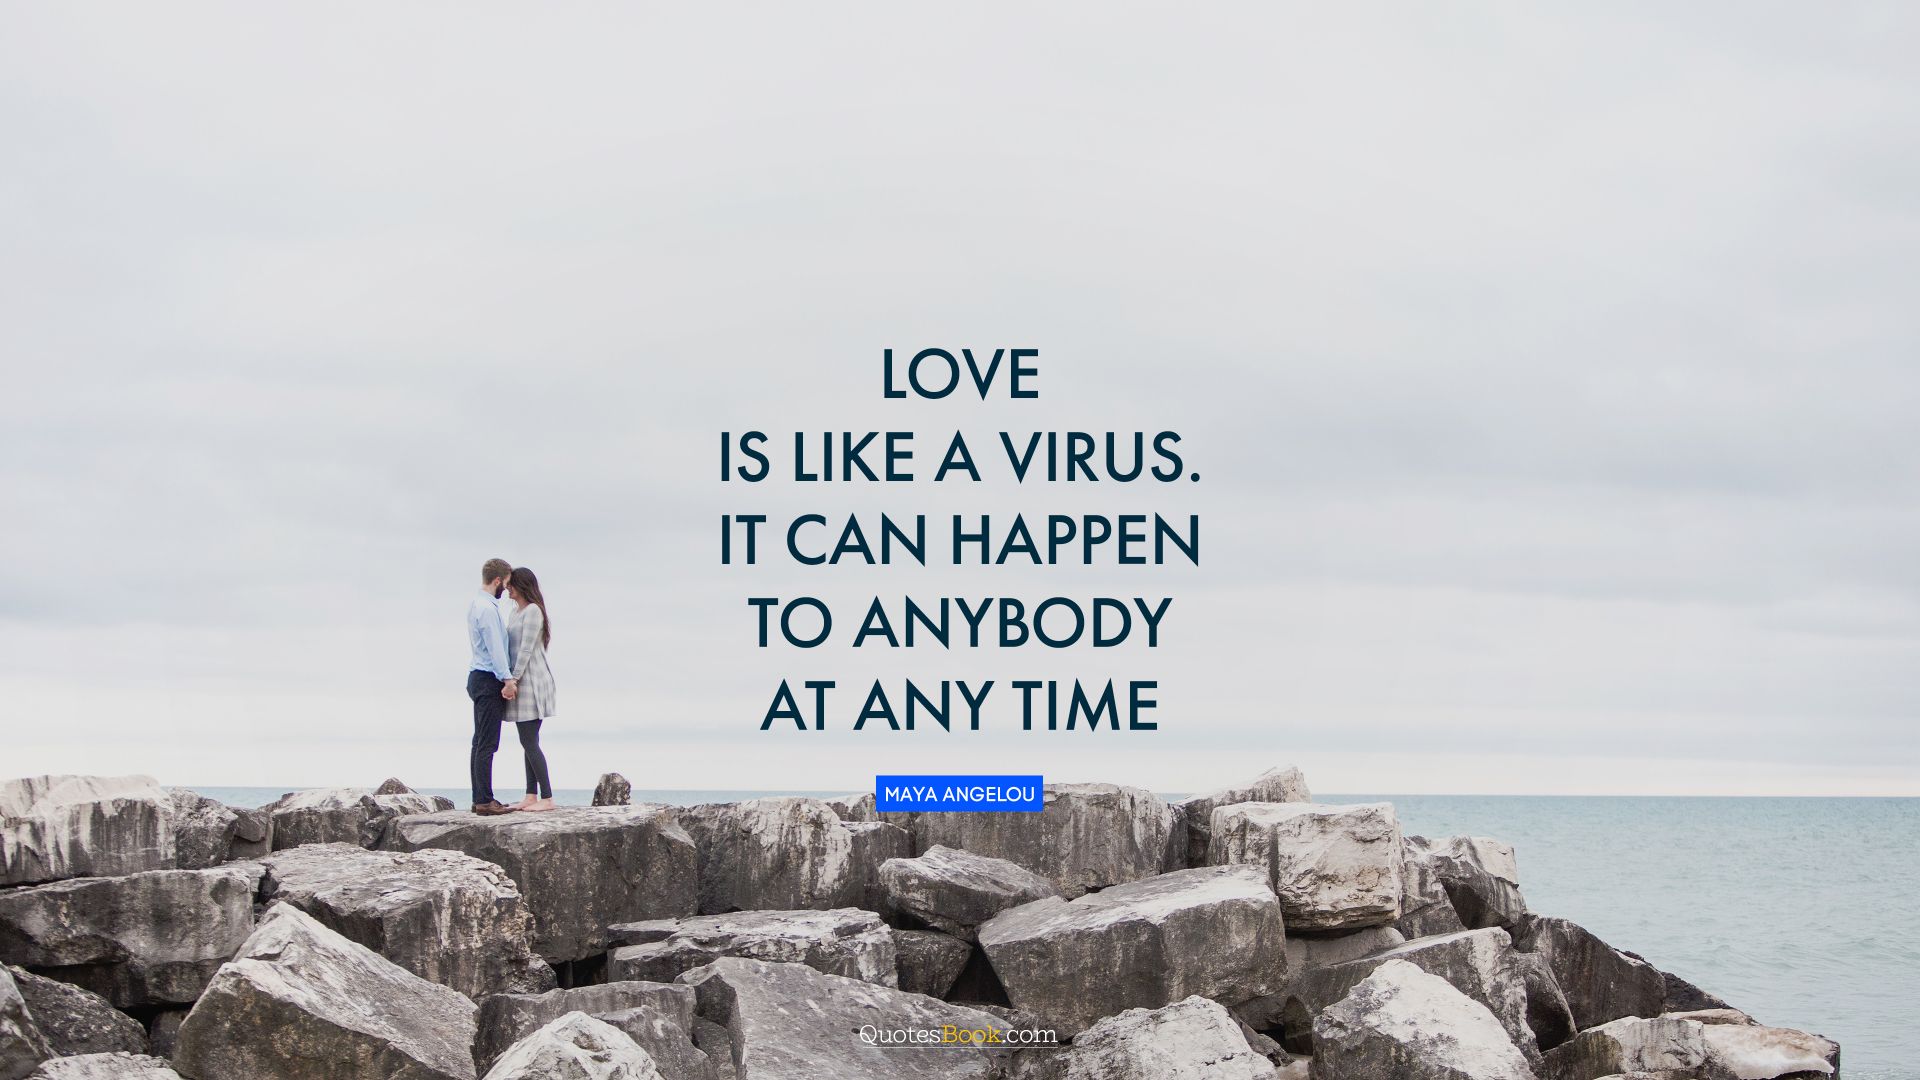 Love is like a virus. It can happen to anybody at any time. - Quote by Maya Angelou